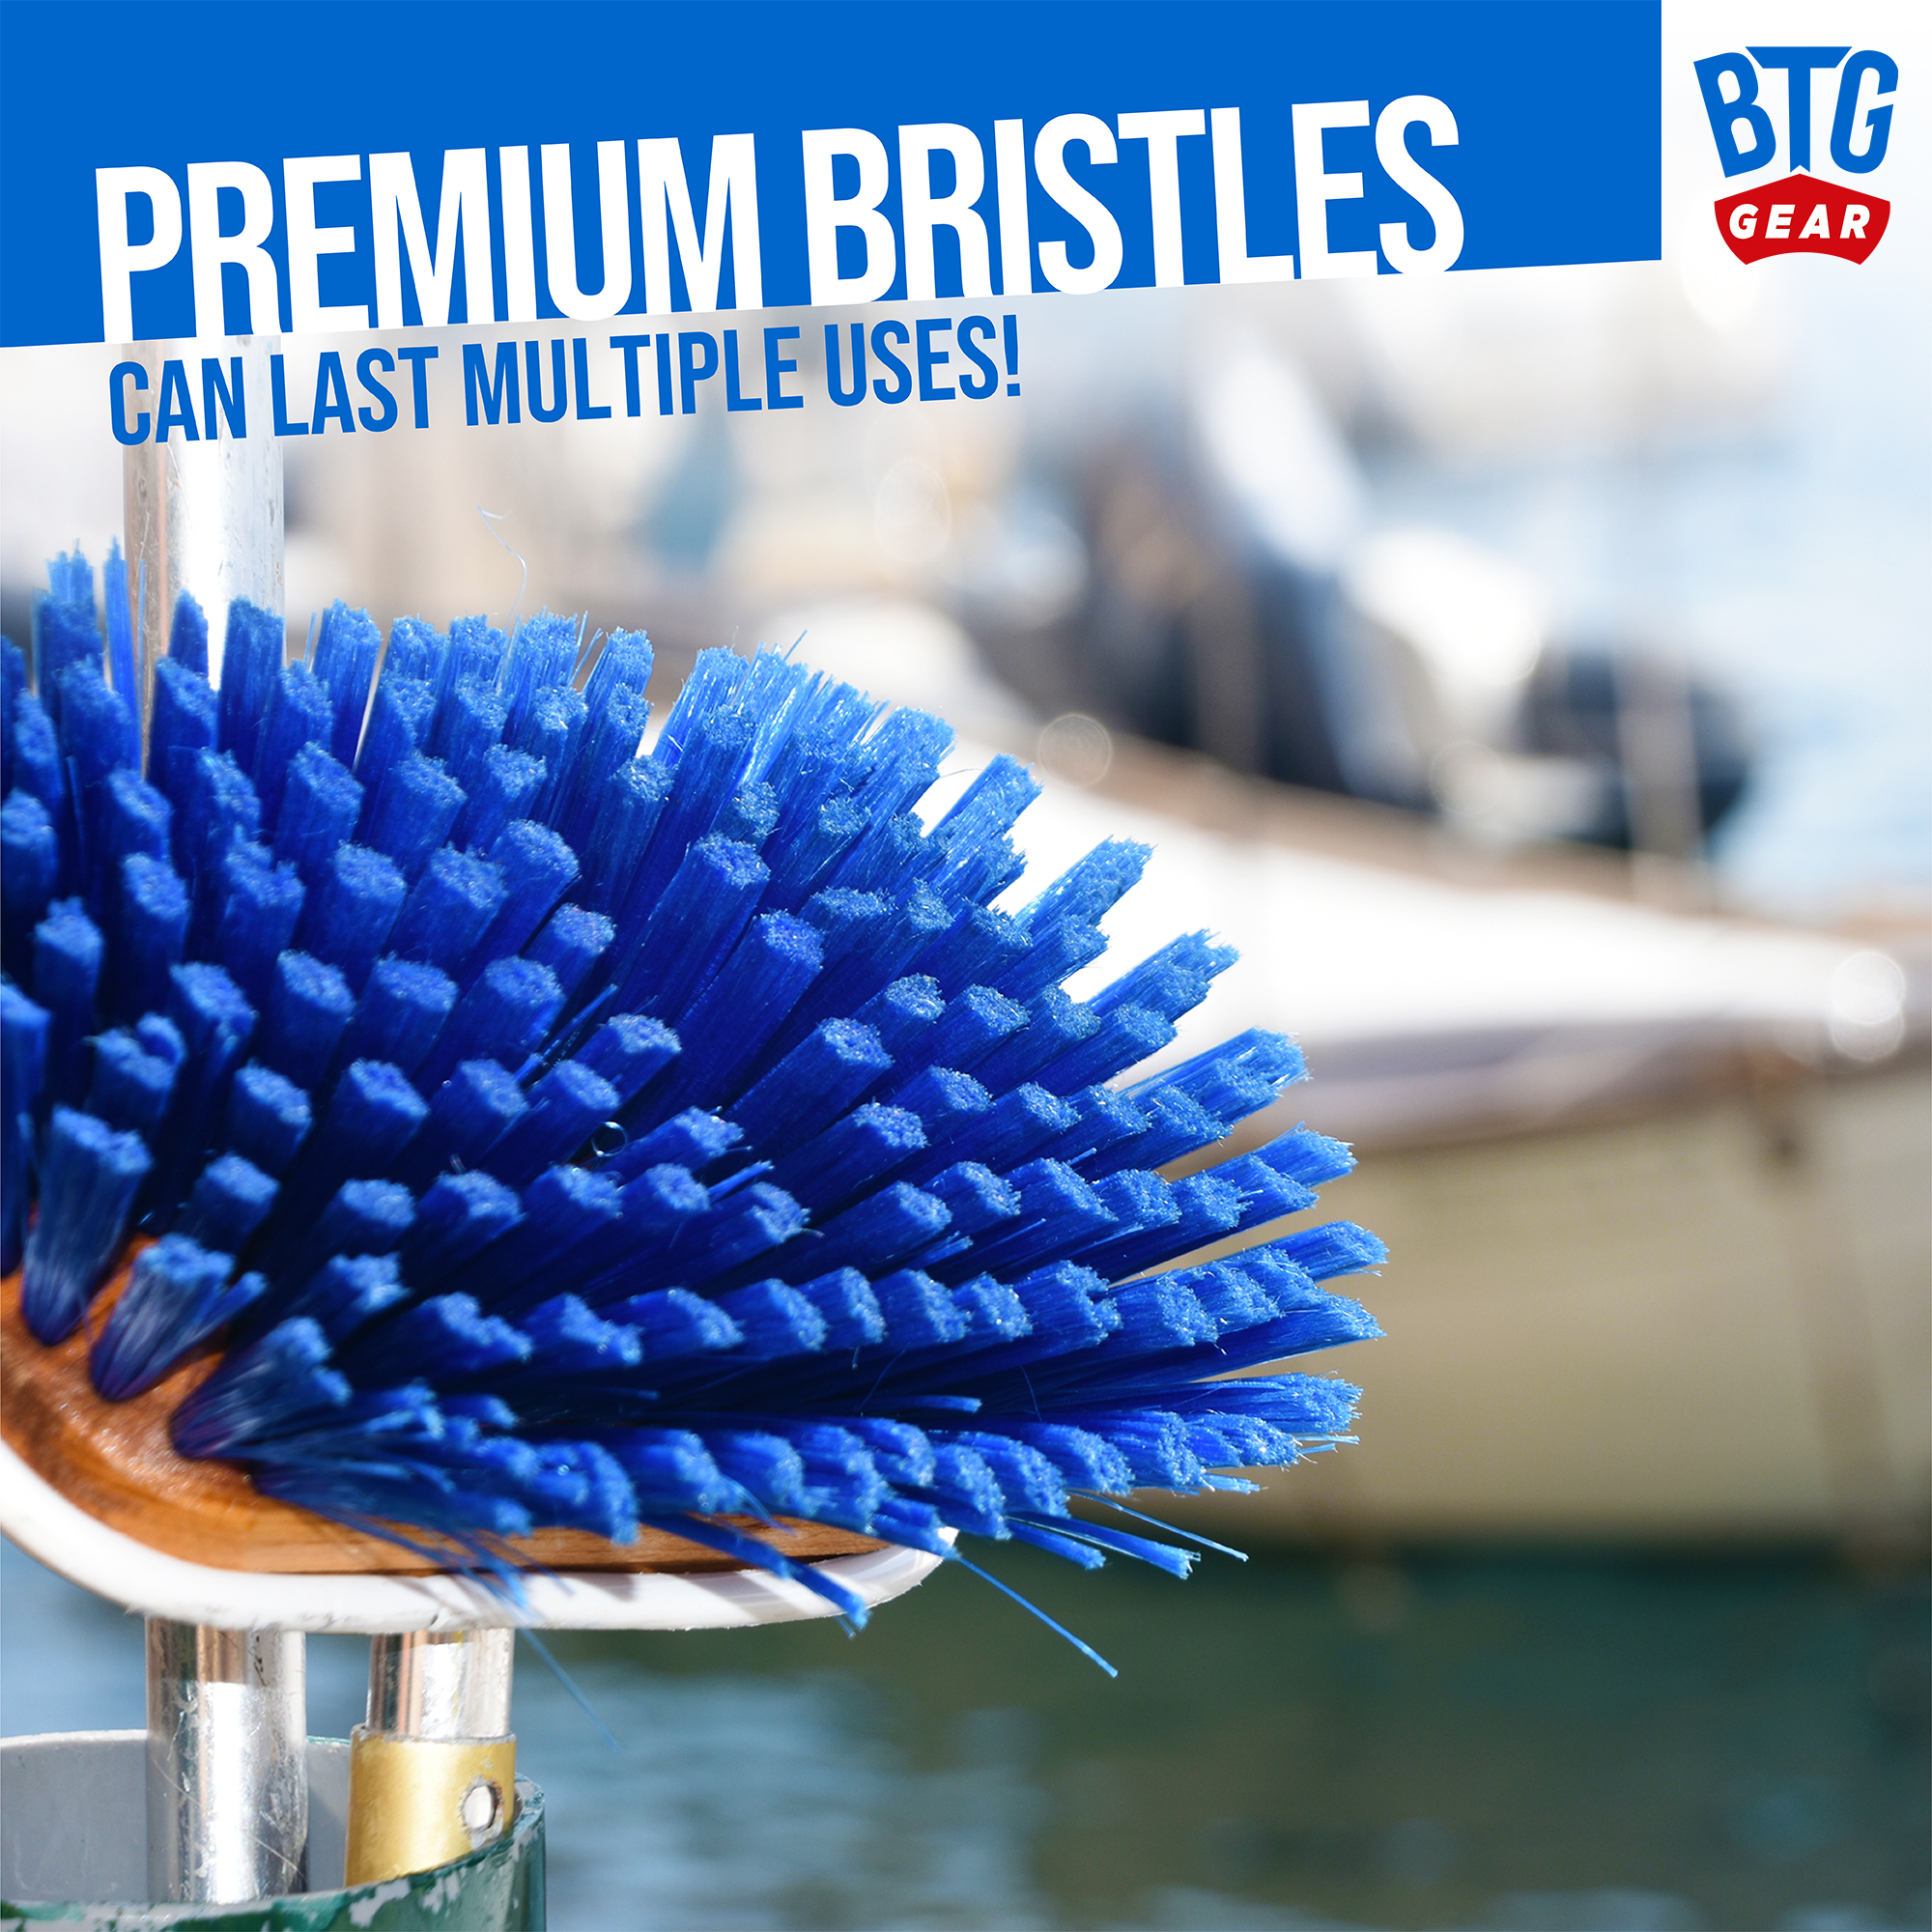 BTG Gear Medium Thickness Marine-Grade Removable Boat Deck Brush for Cleaning Hull/Railings - Snap Button